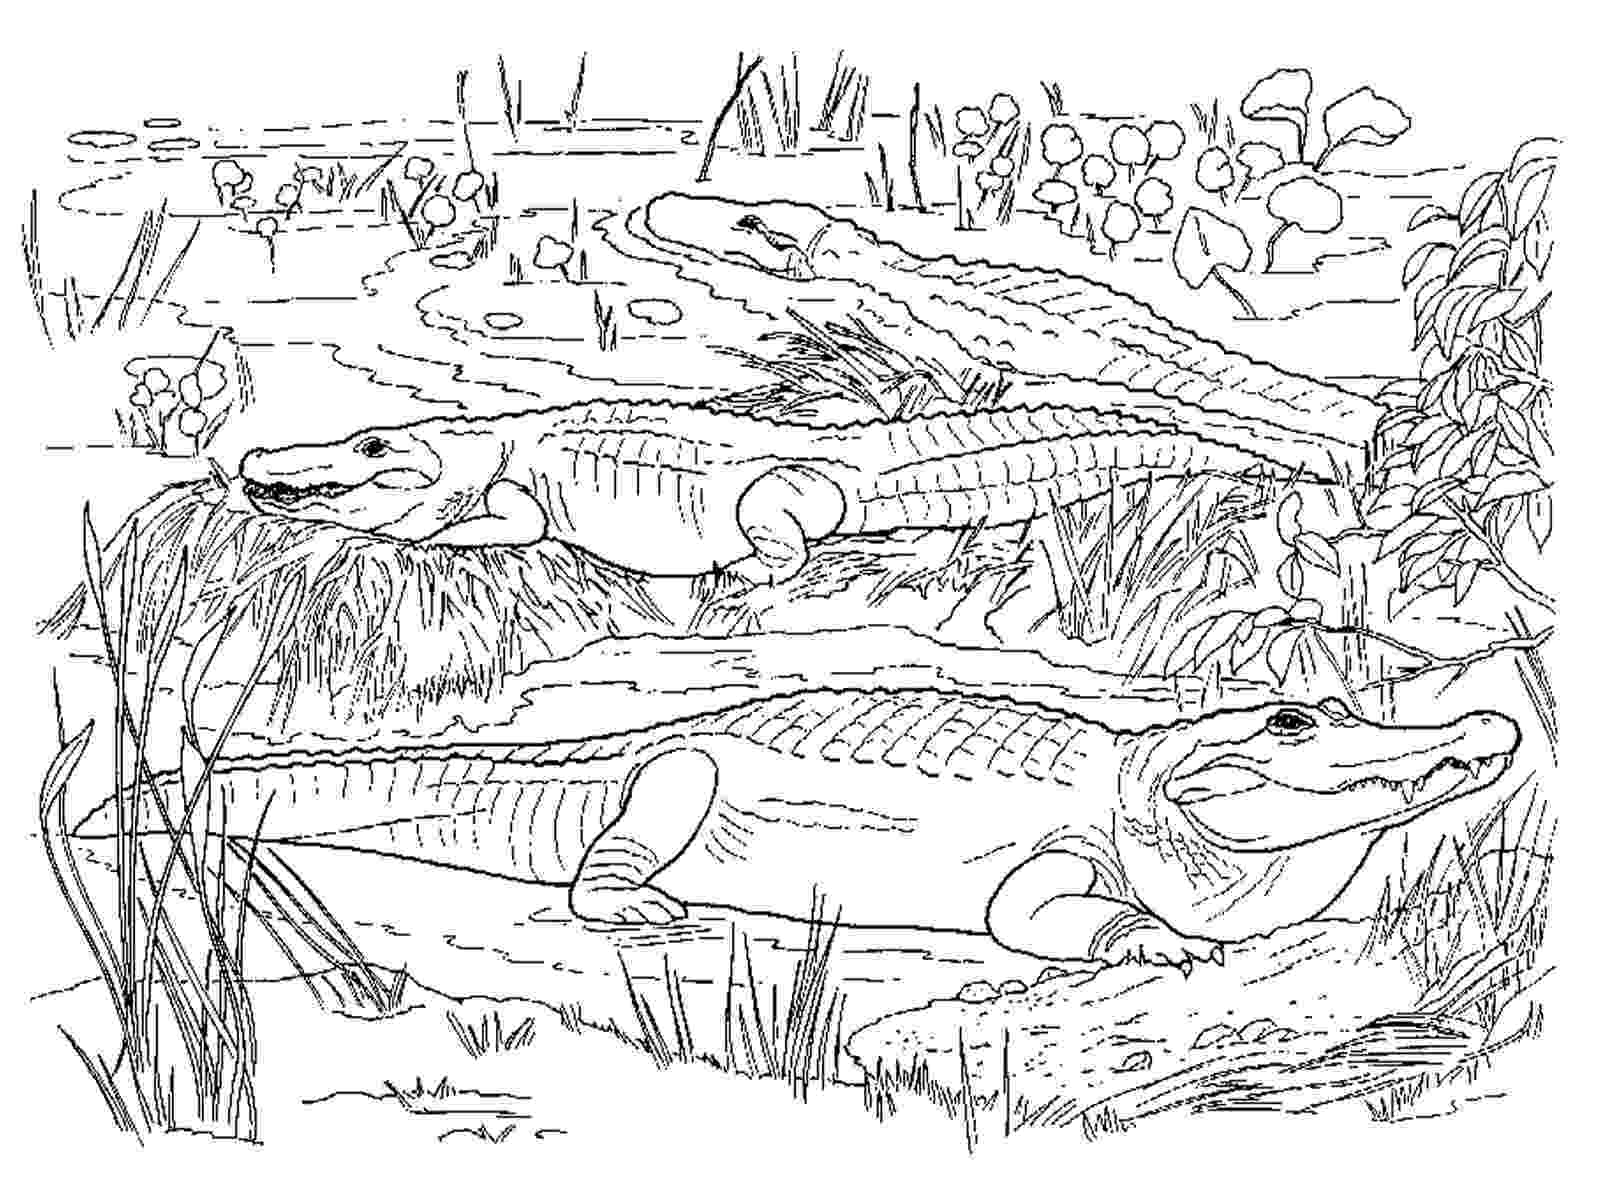 picture of a crocodile to colour alligators and crocodiles coloring pages download and to colour of picture crocodile a 